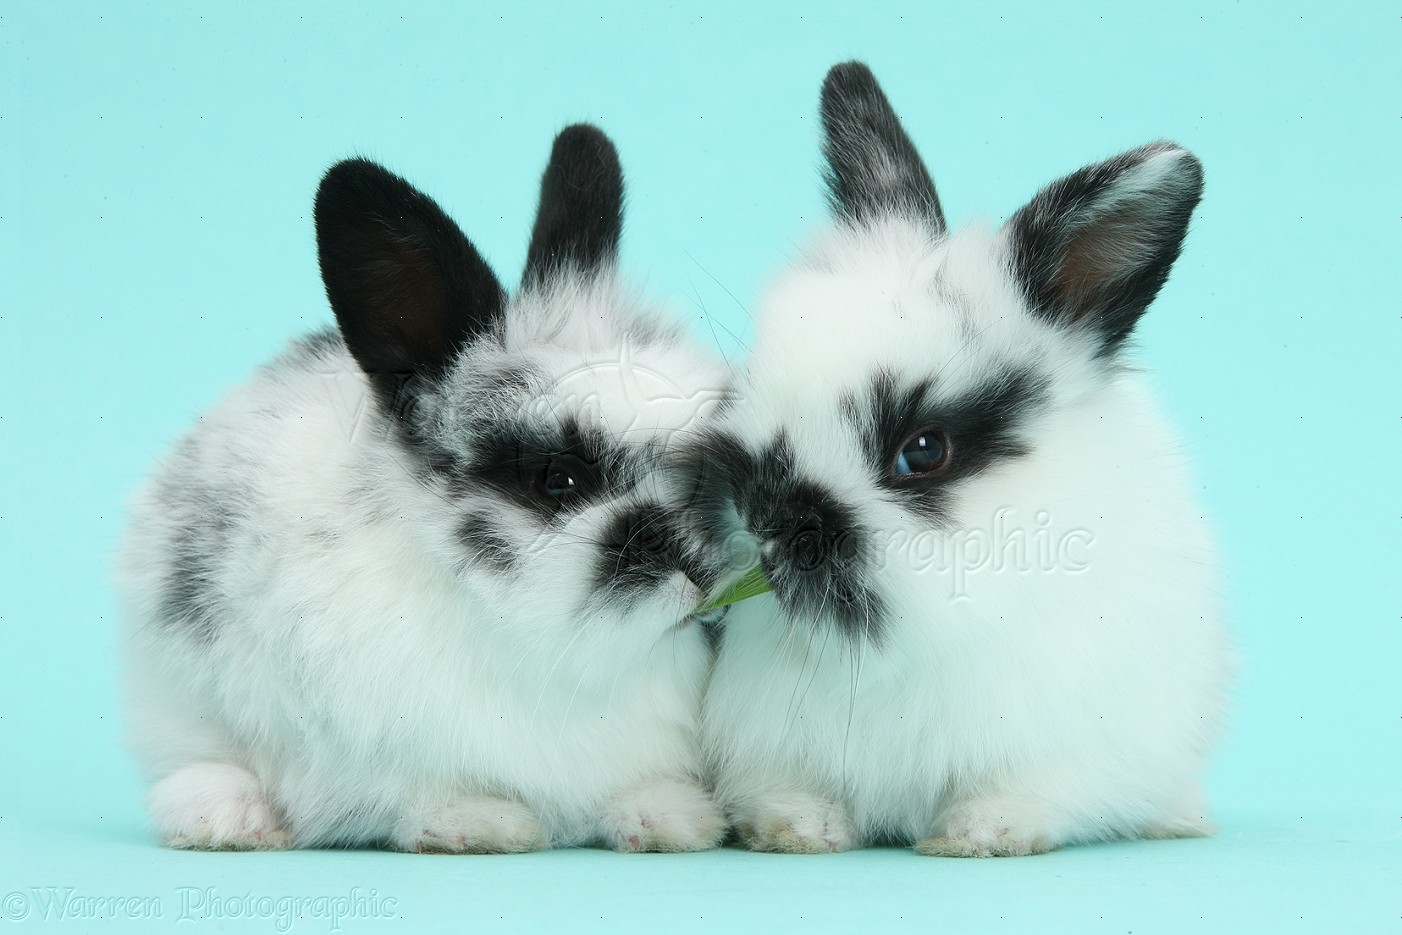 Cute black-and-white baby bunnies on blue background photo WP40459